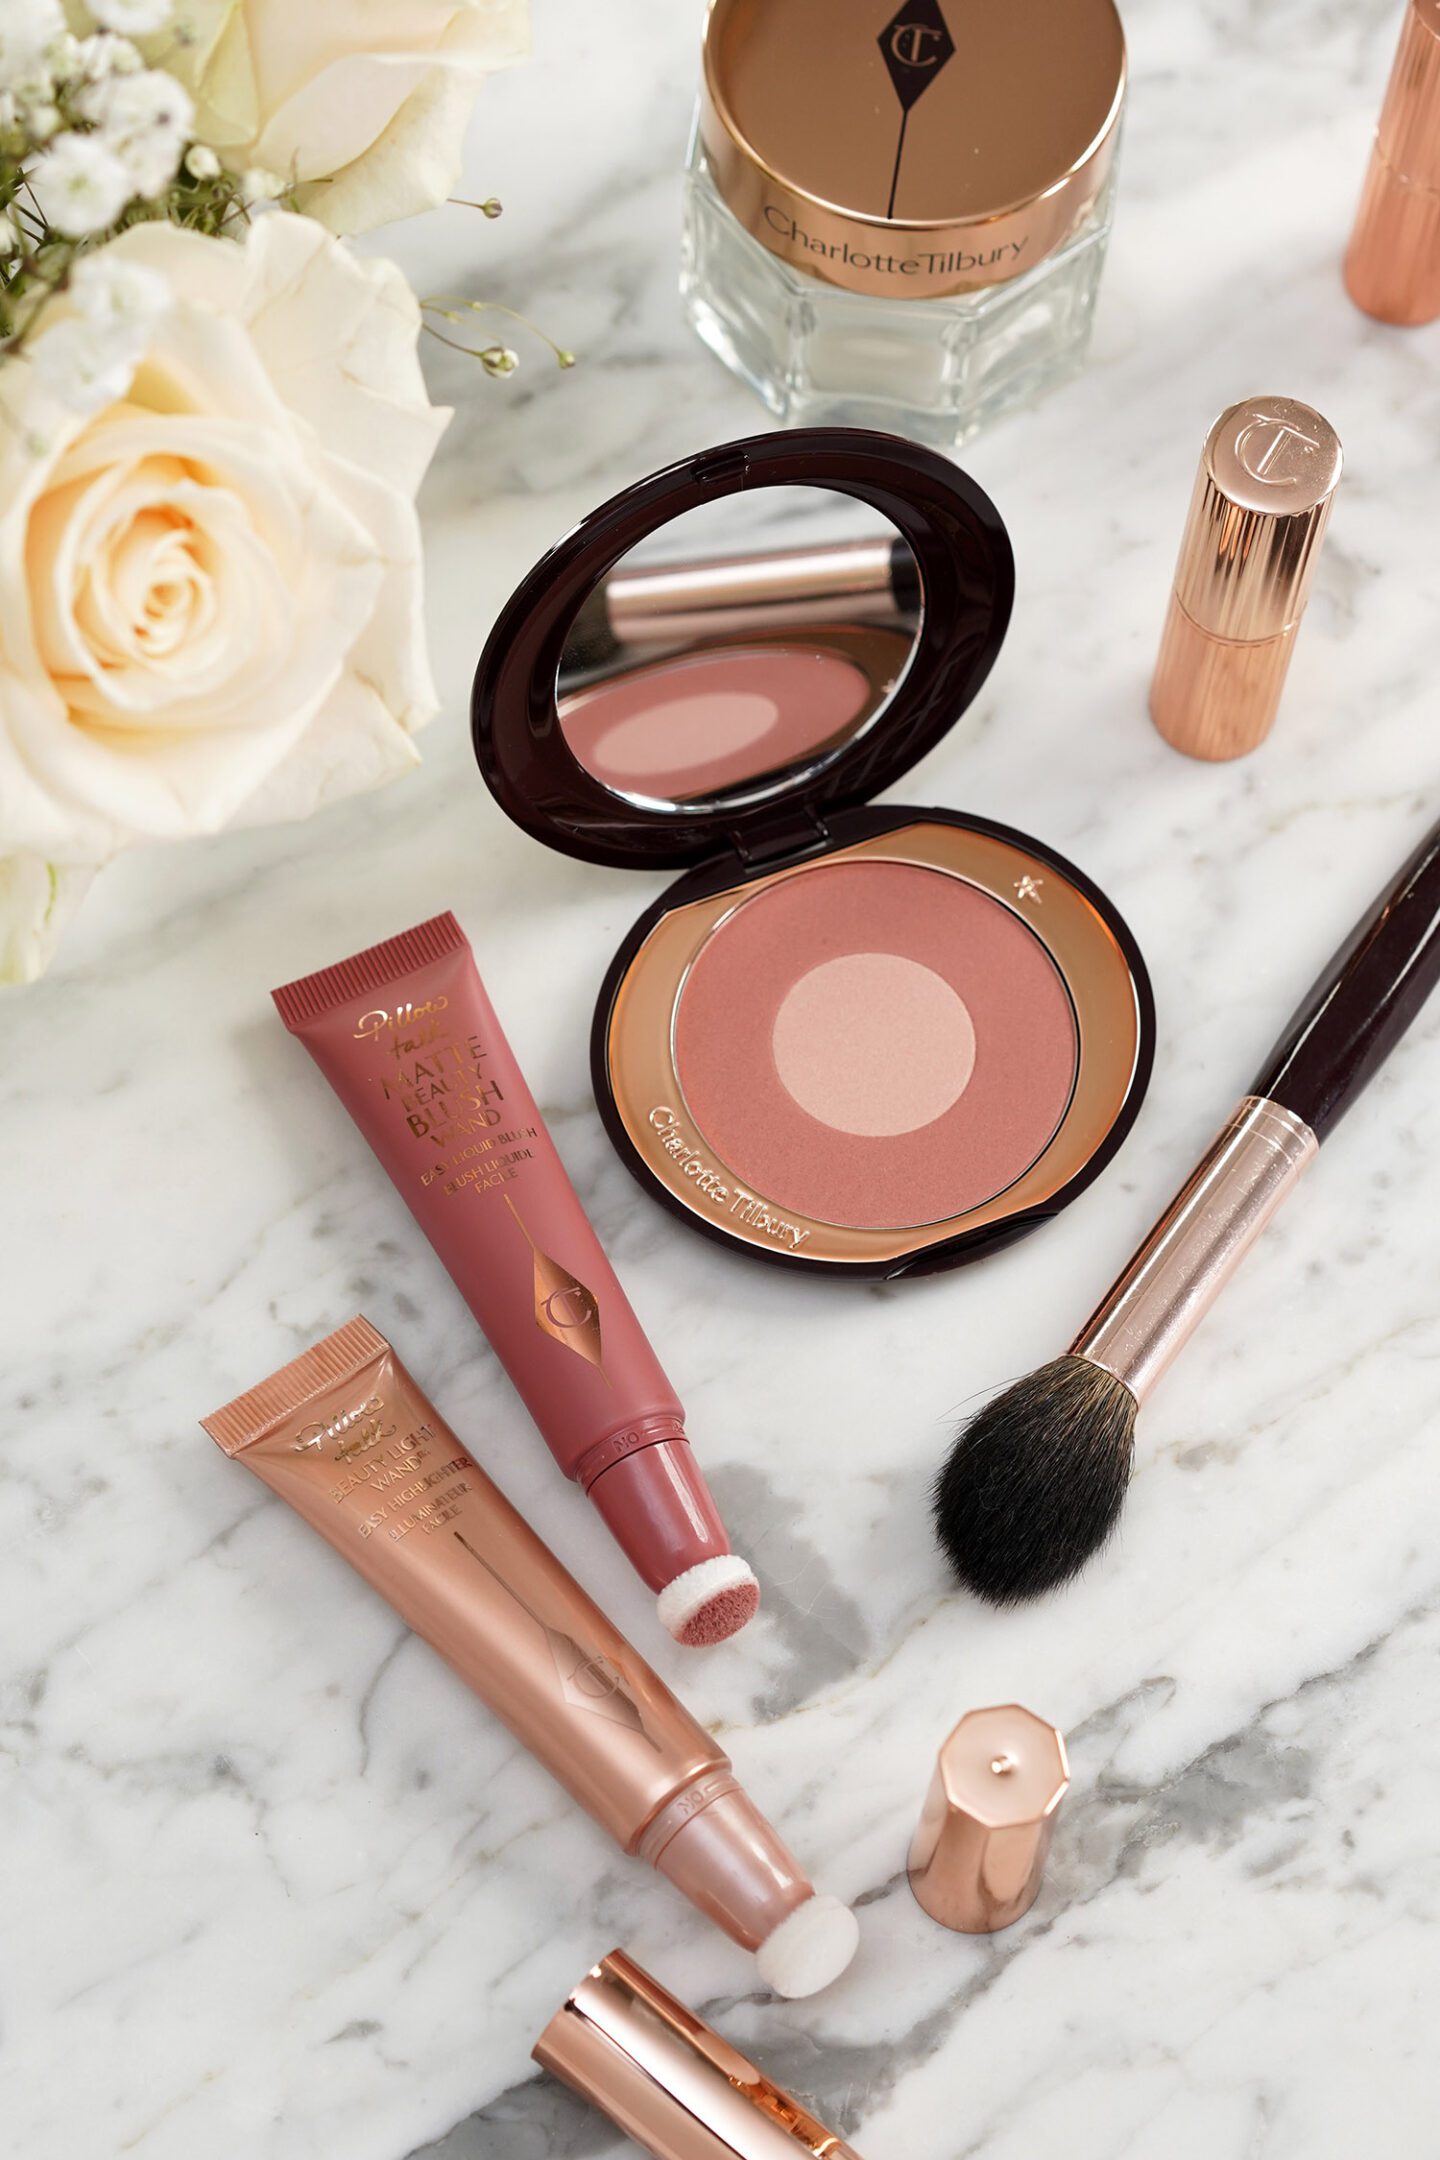 Charlotte Tilbury Pillow Talk Cheek Products Blush and Highlighter